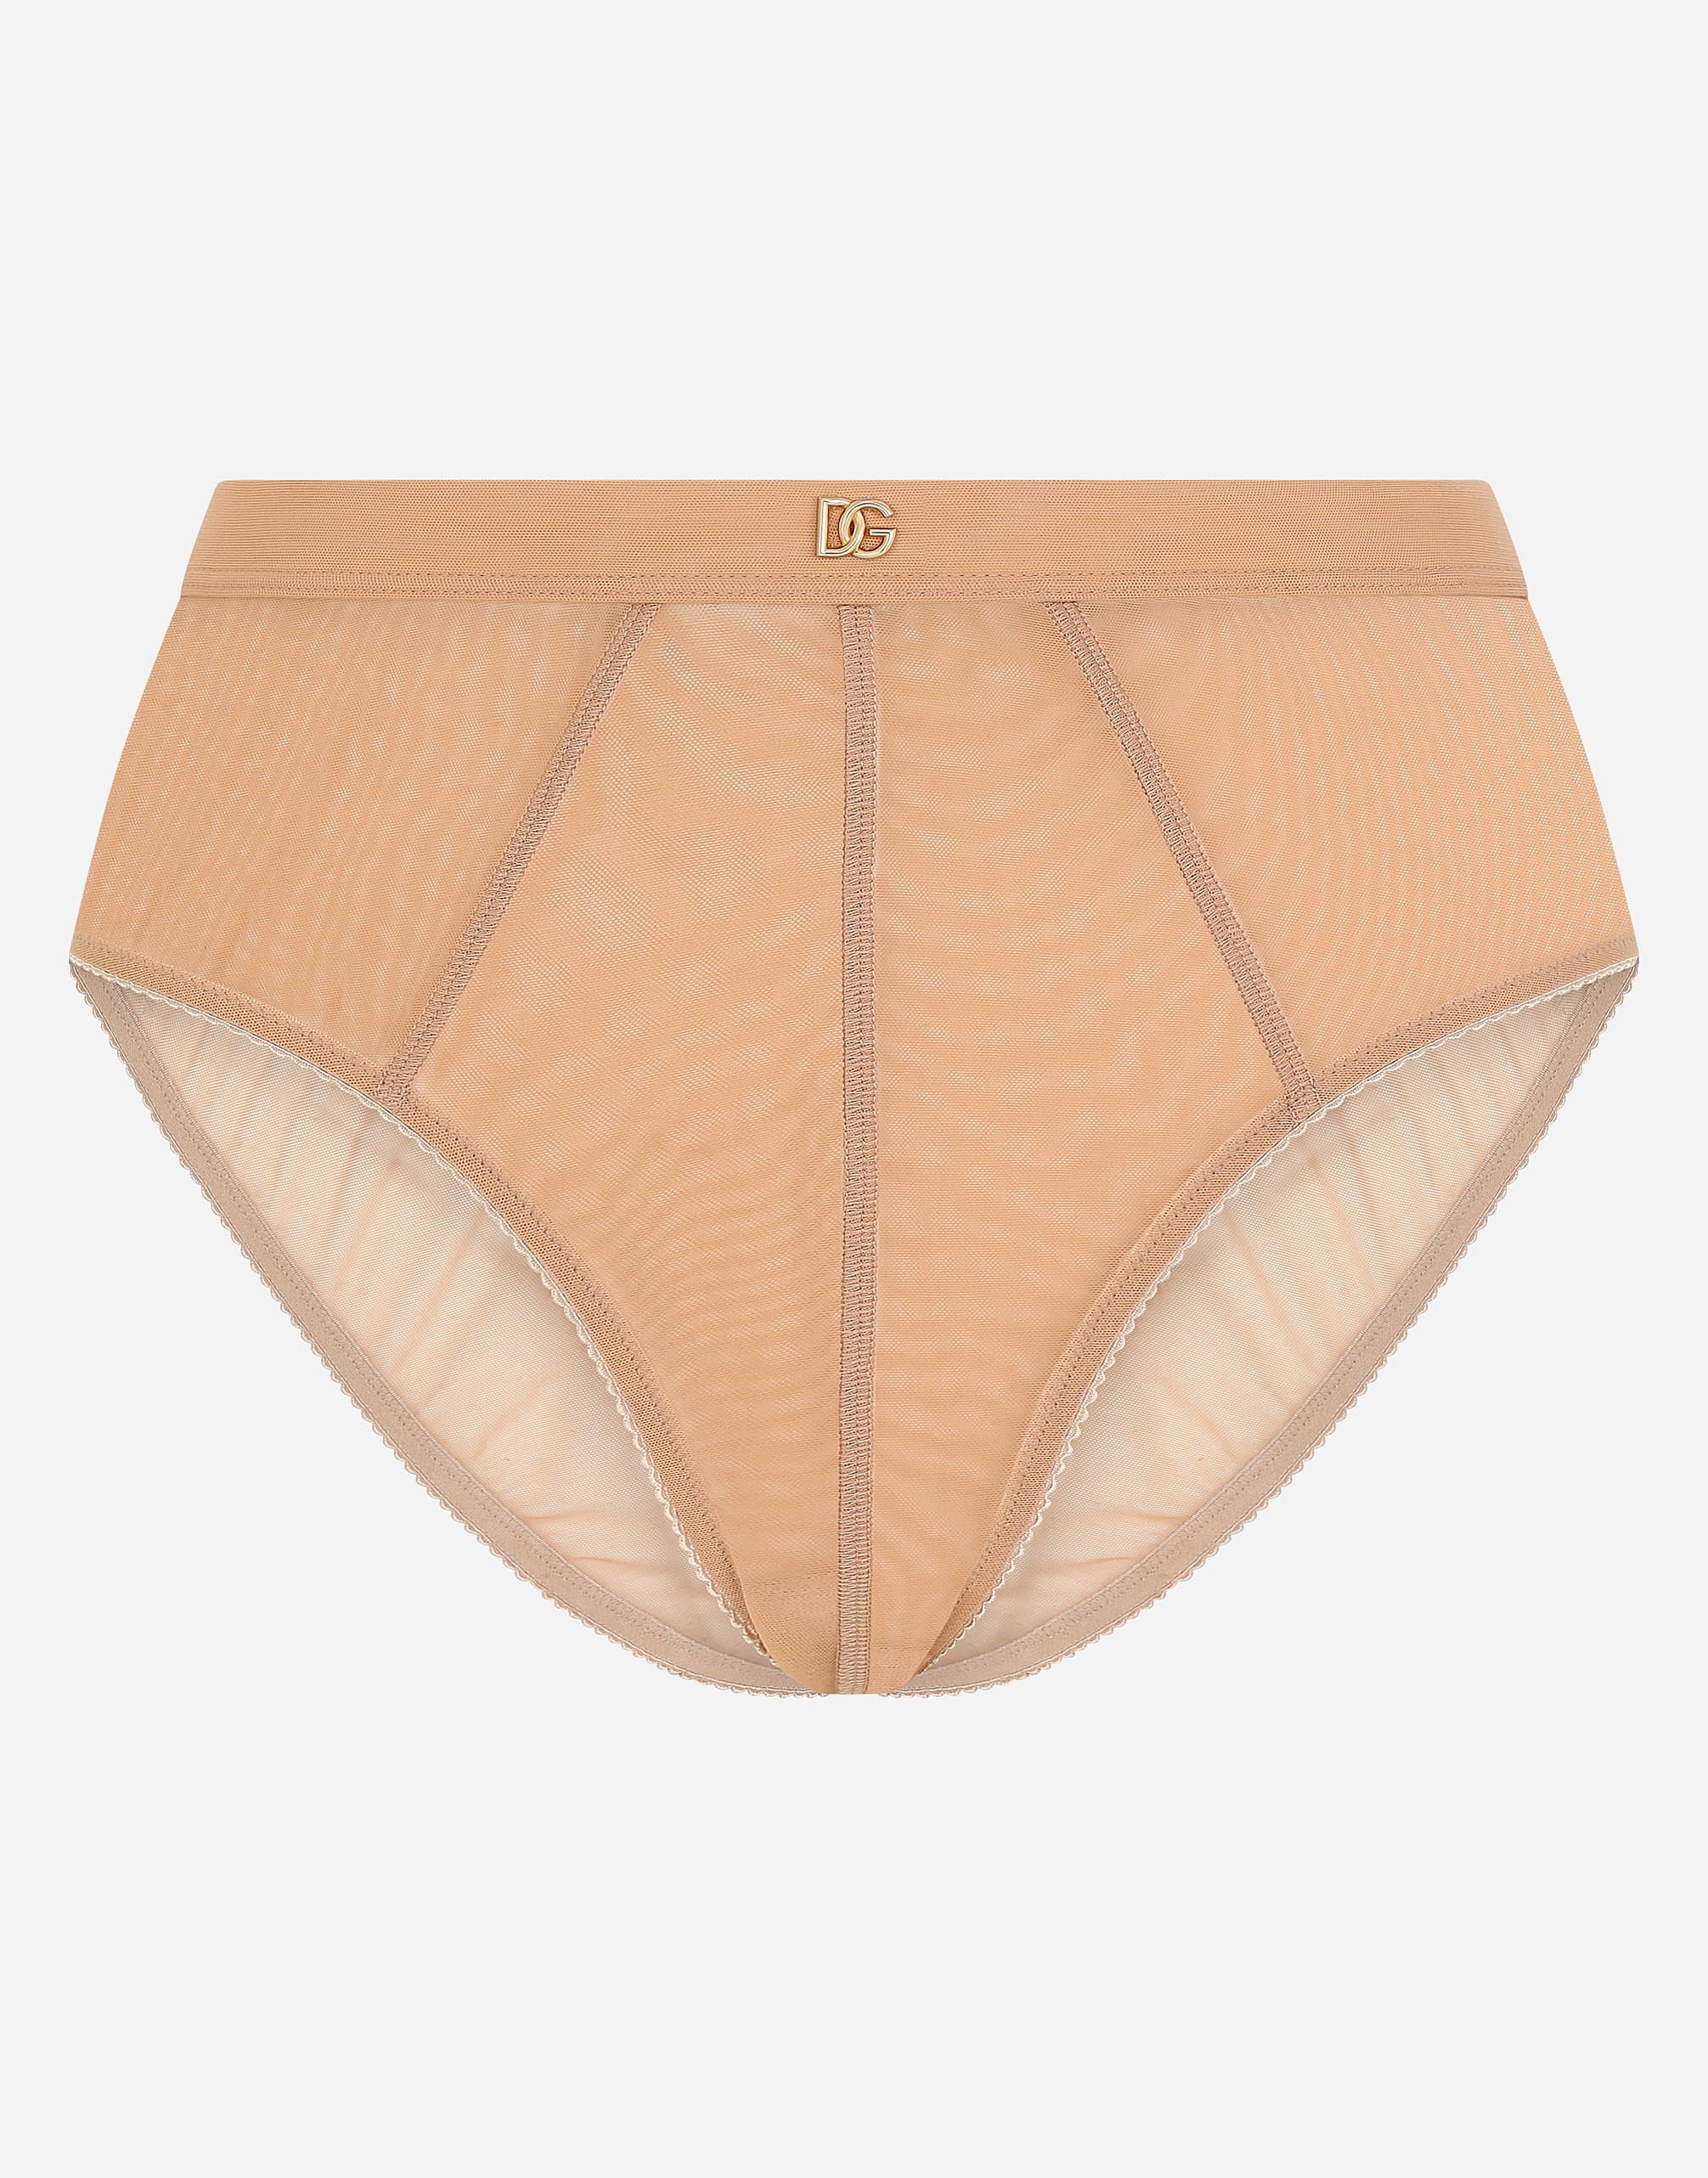 High-waisted tulle briefs with DG logo in Multicolor